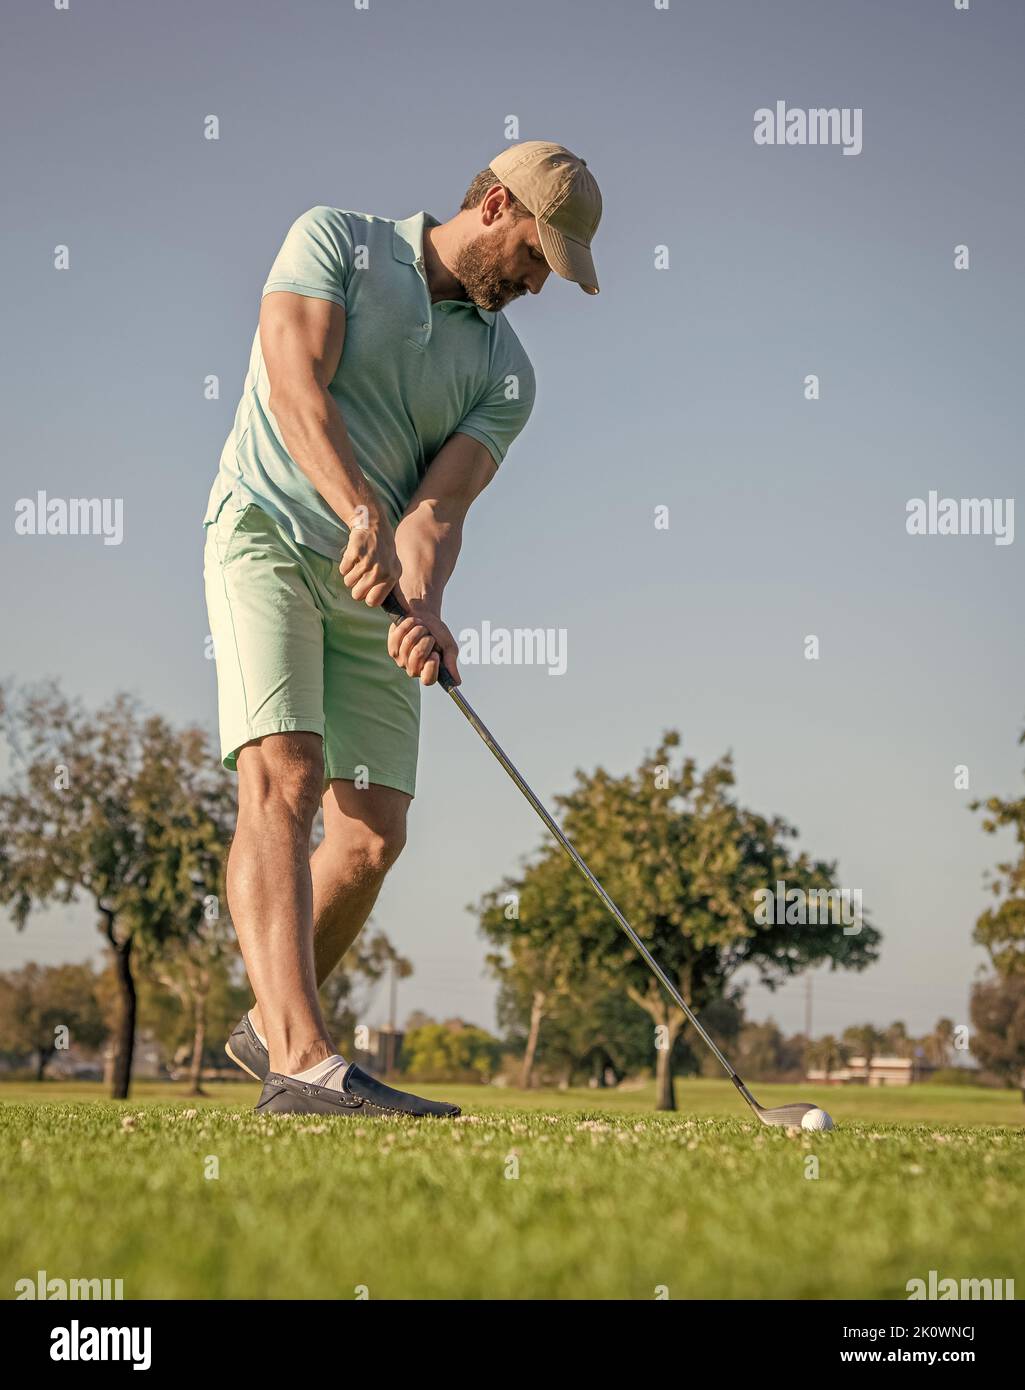 concentrated golfer in cap with golf club, golfing Stock Photo